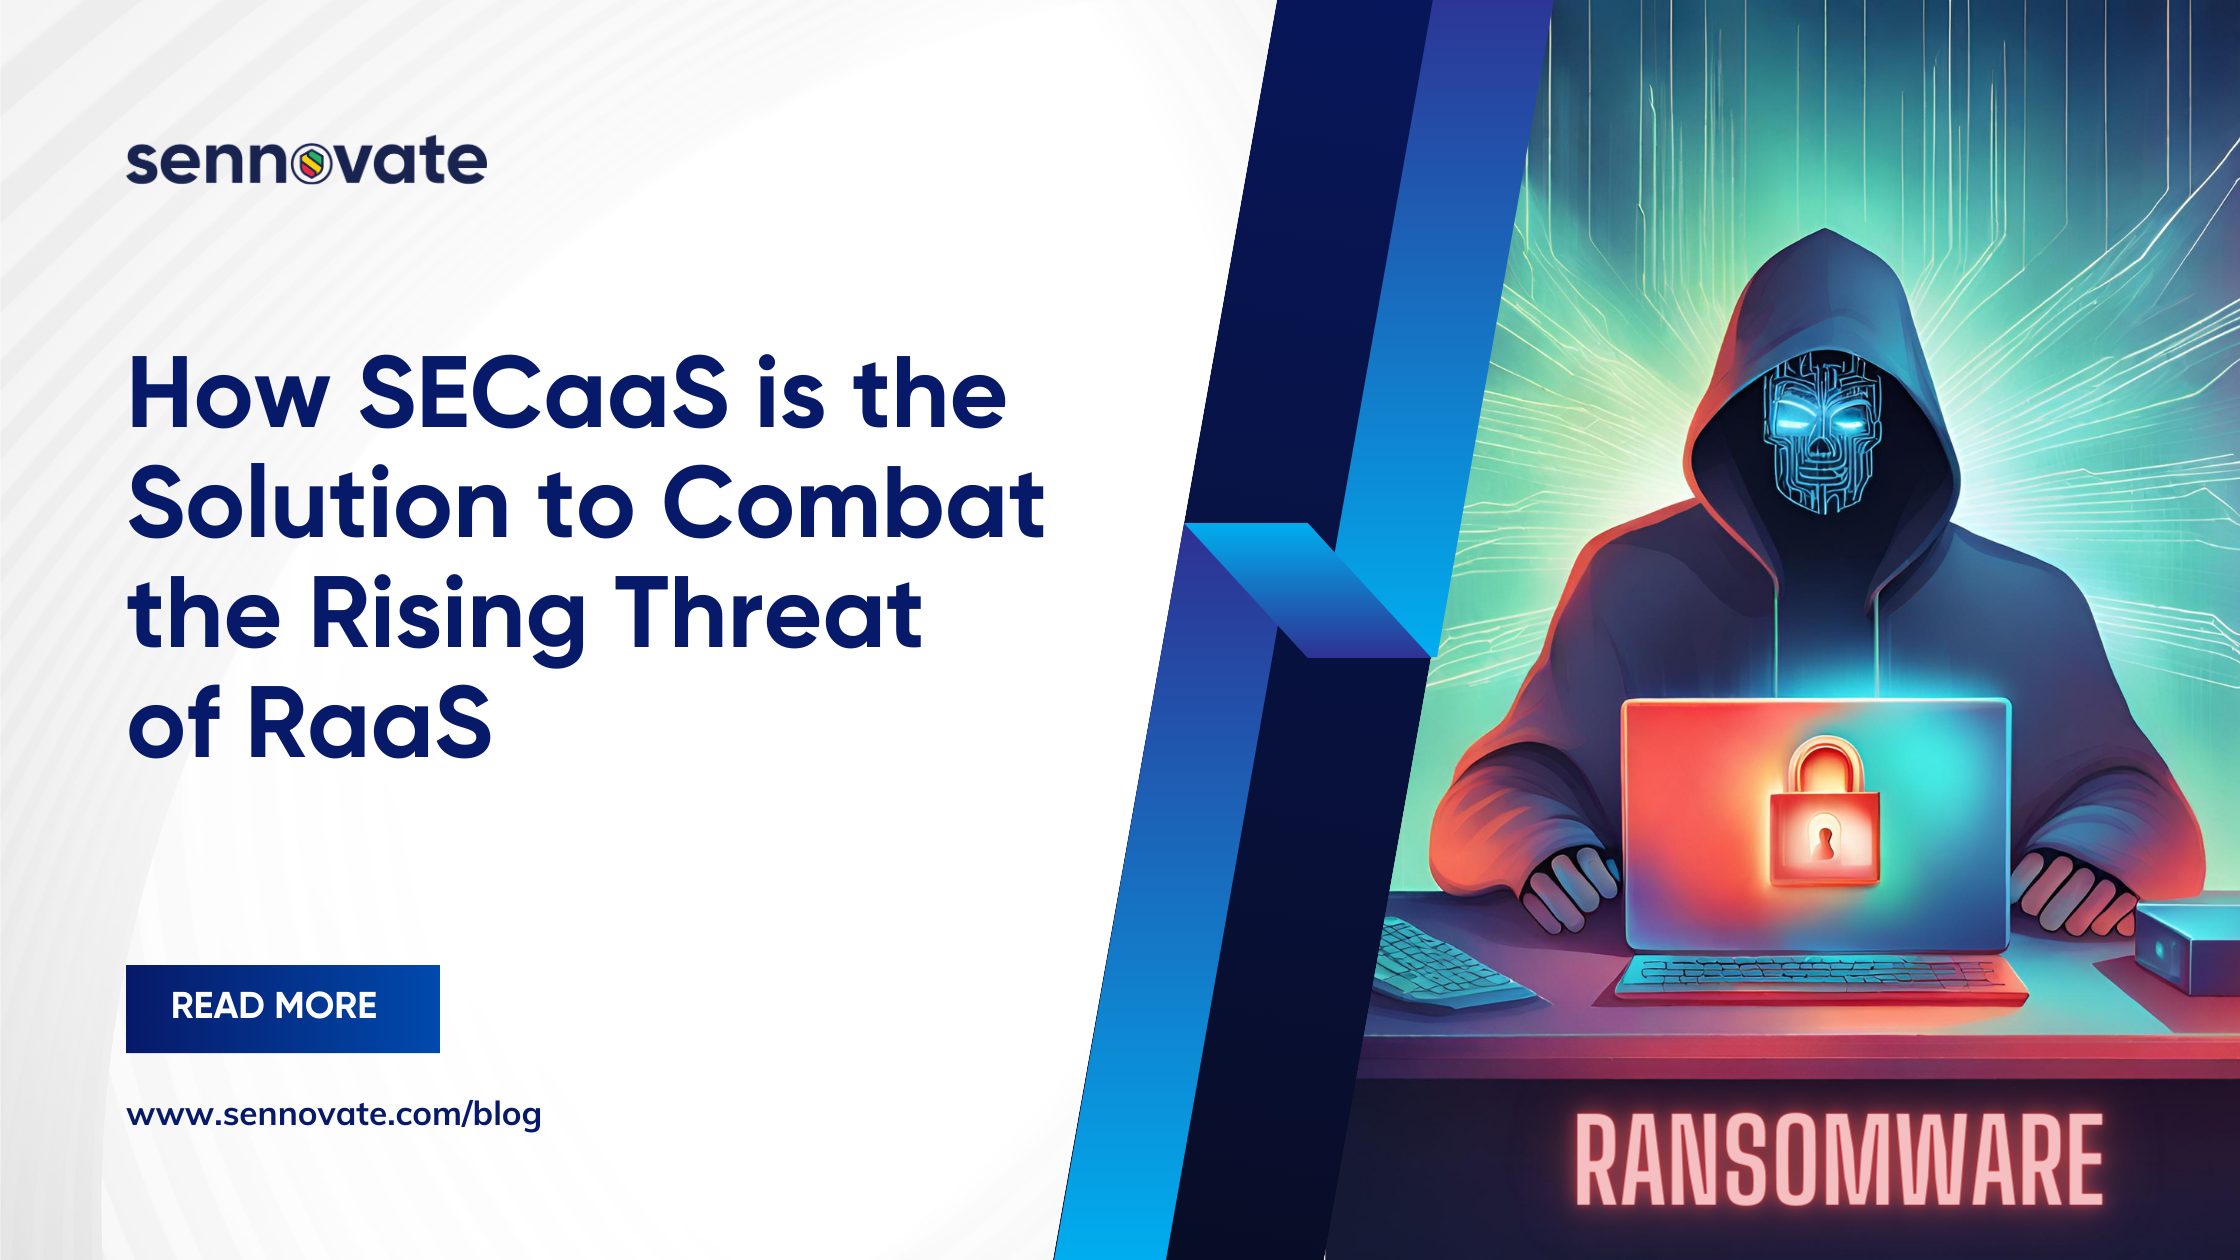 How SECaaS is the Solution to Combat the Rising Threat of RaaS